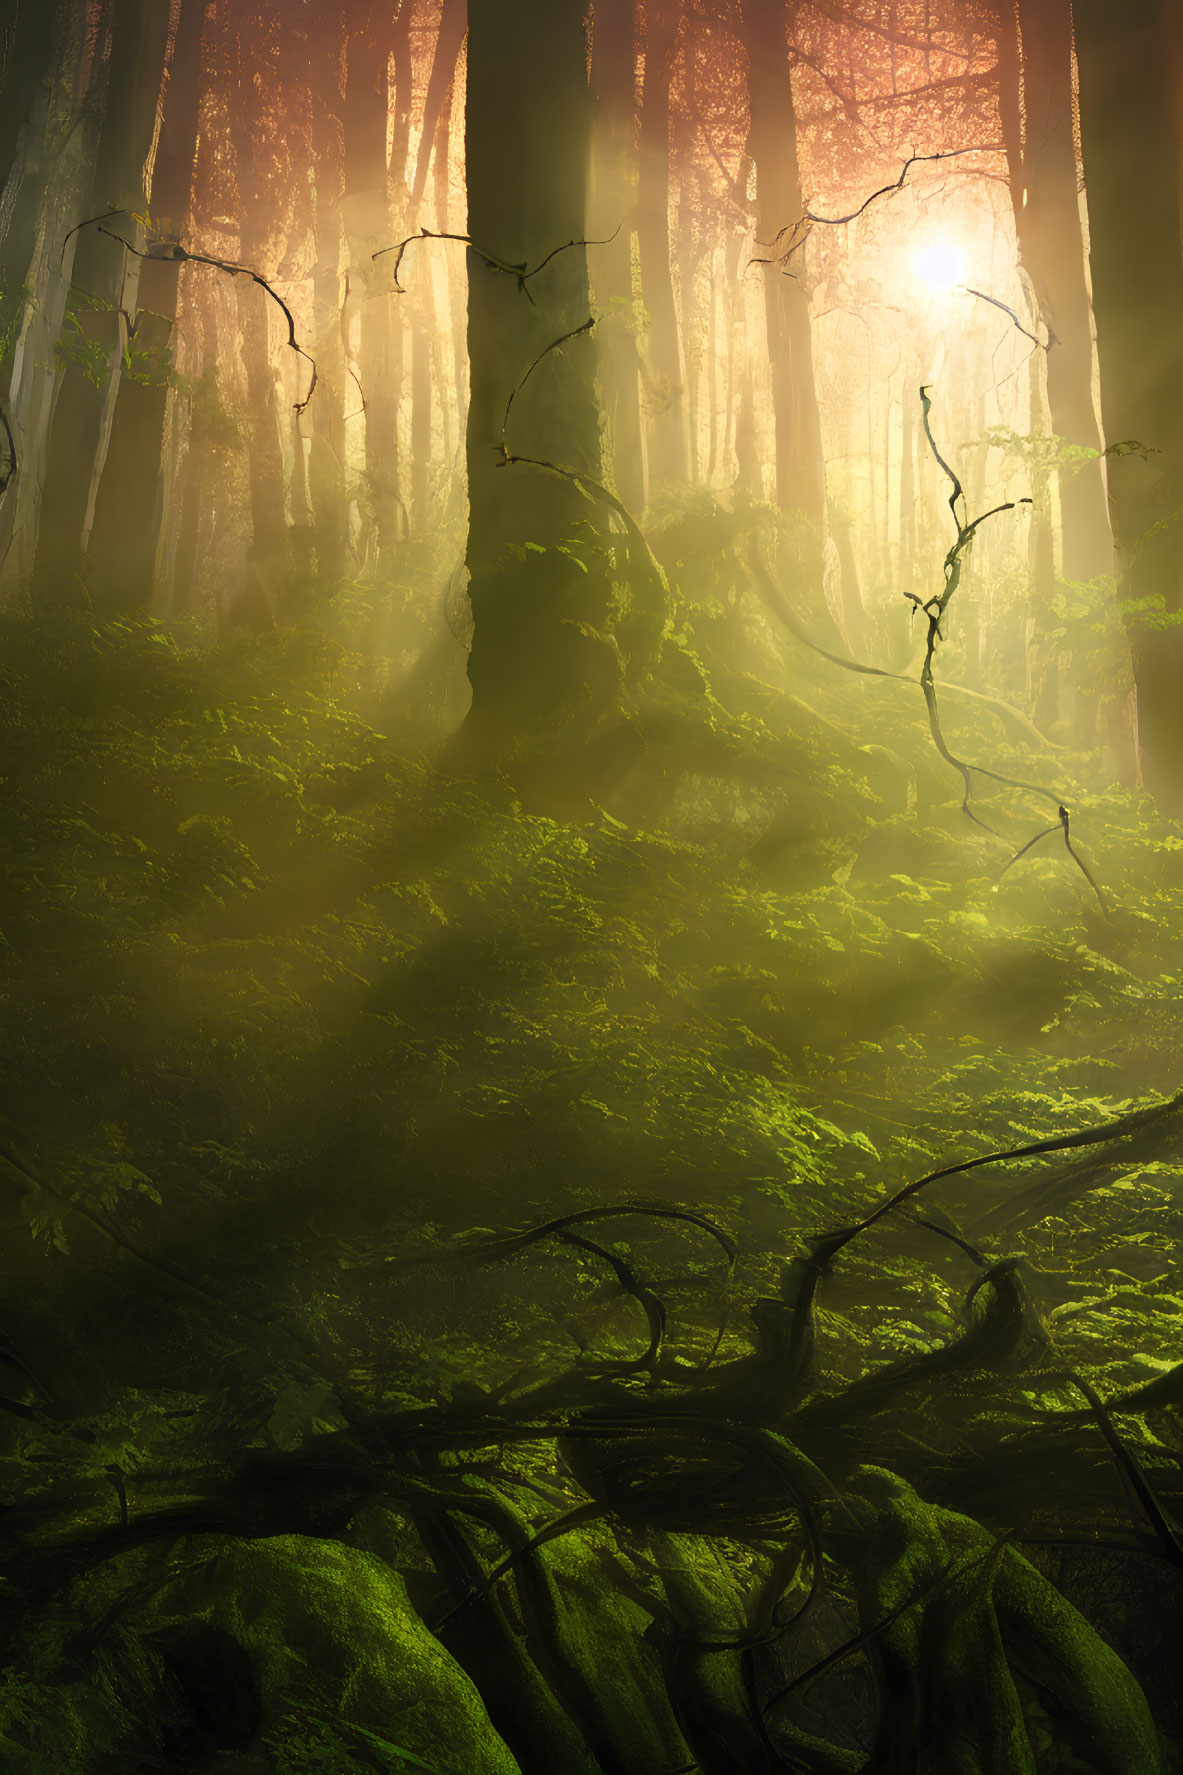 Misty green forest with sunlight filtering through